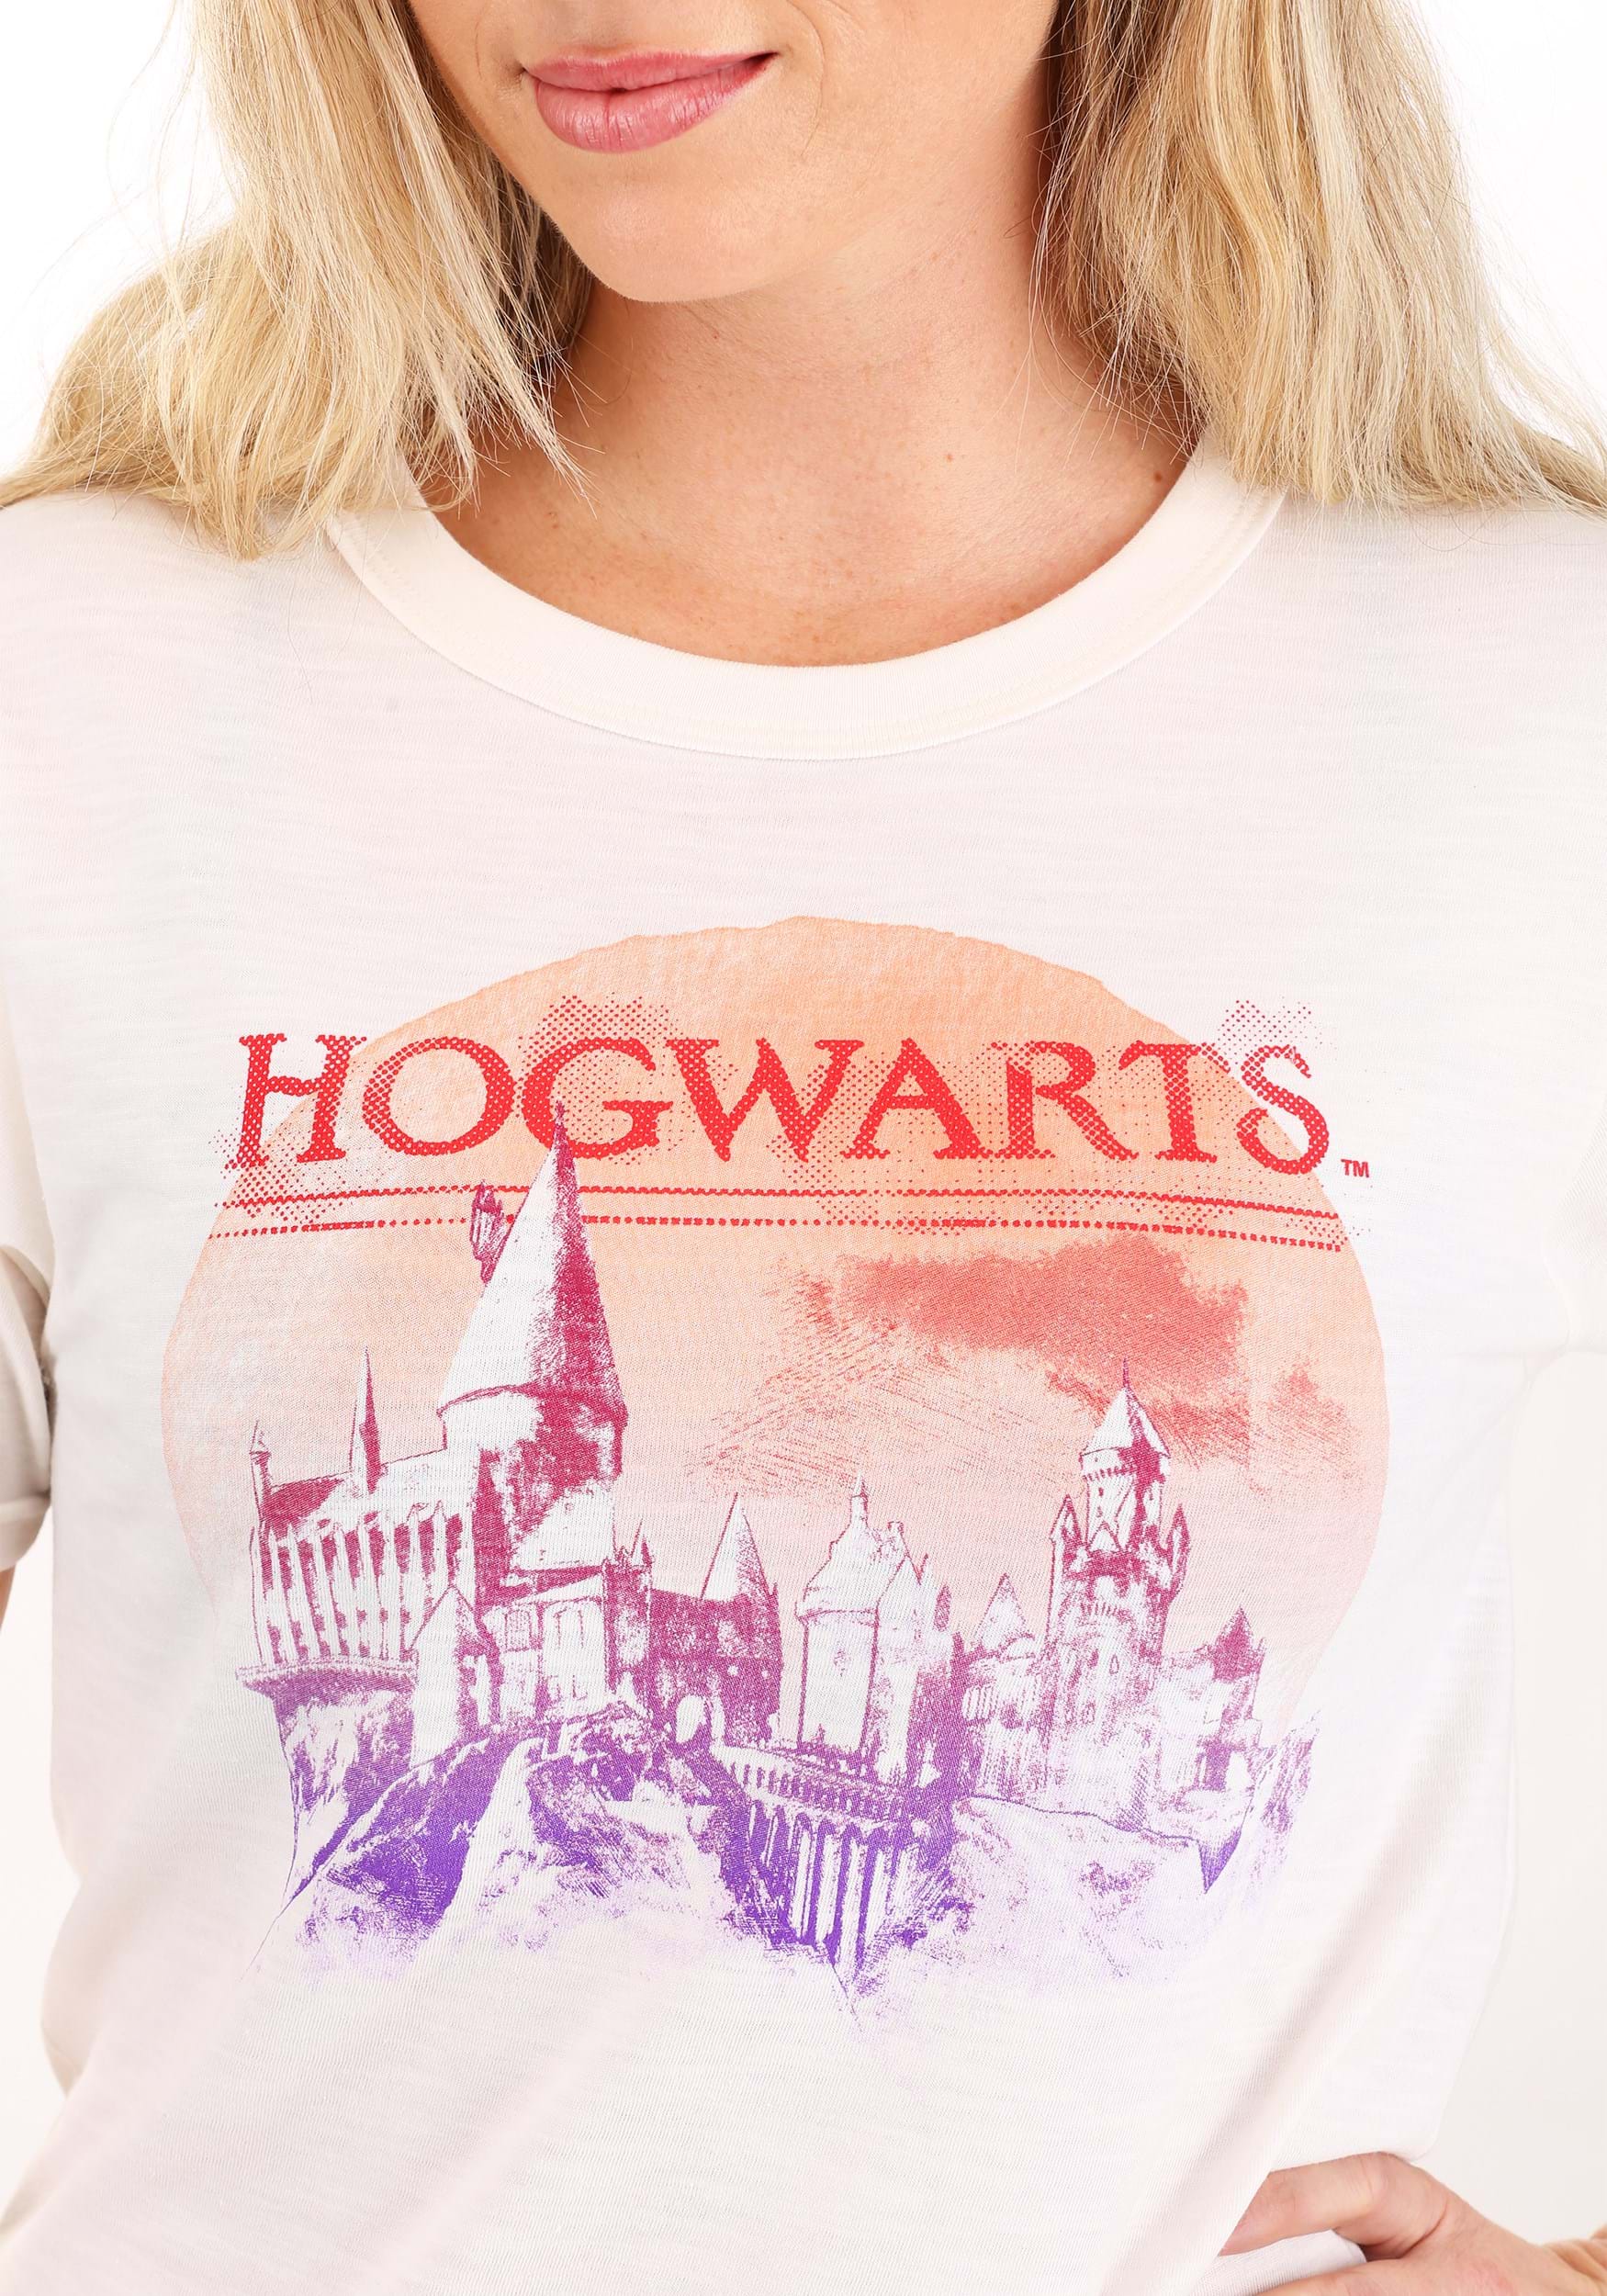 for Moon Harry Hogwarts T-Shirt Adults Potter Red